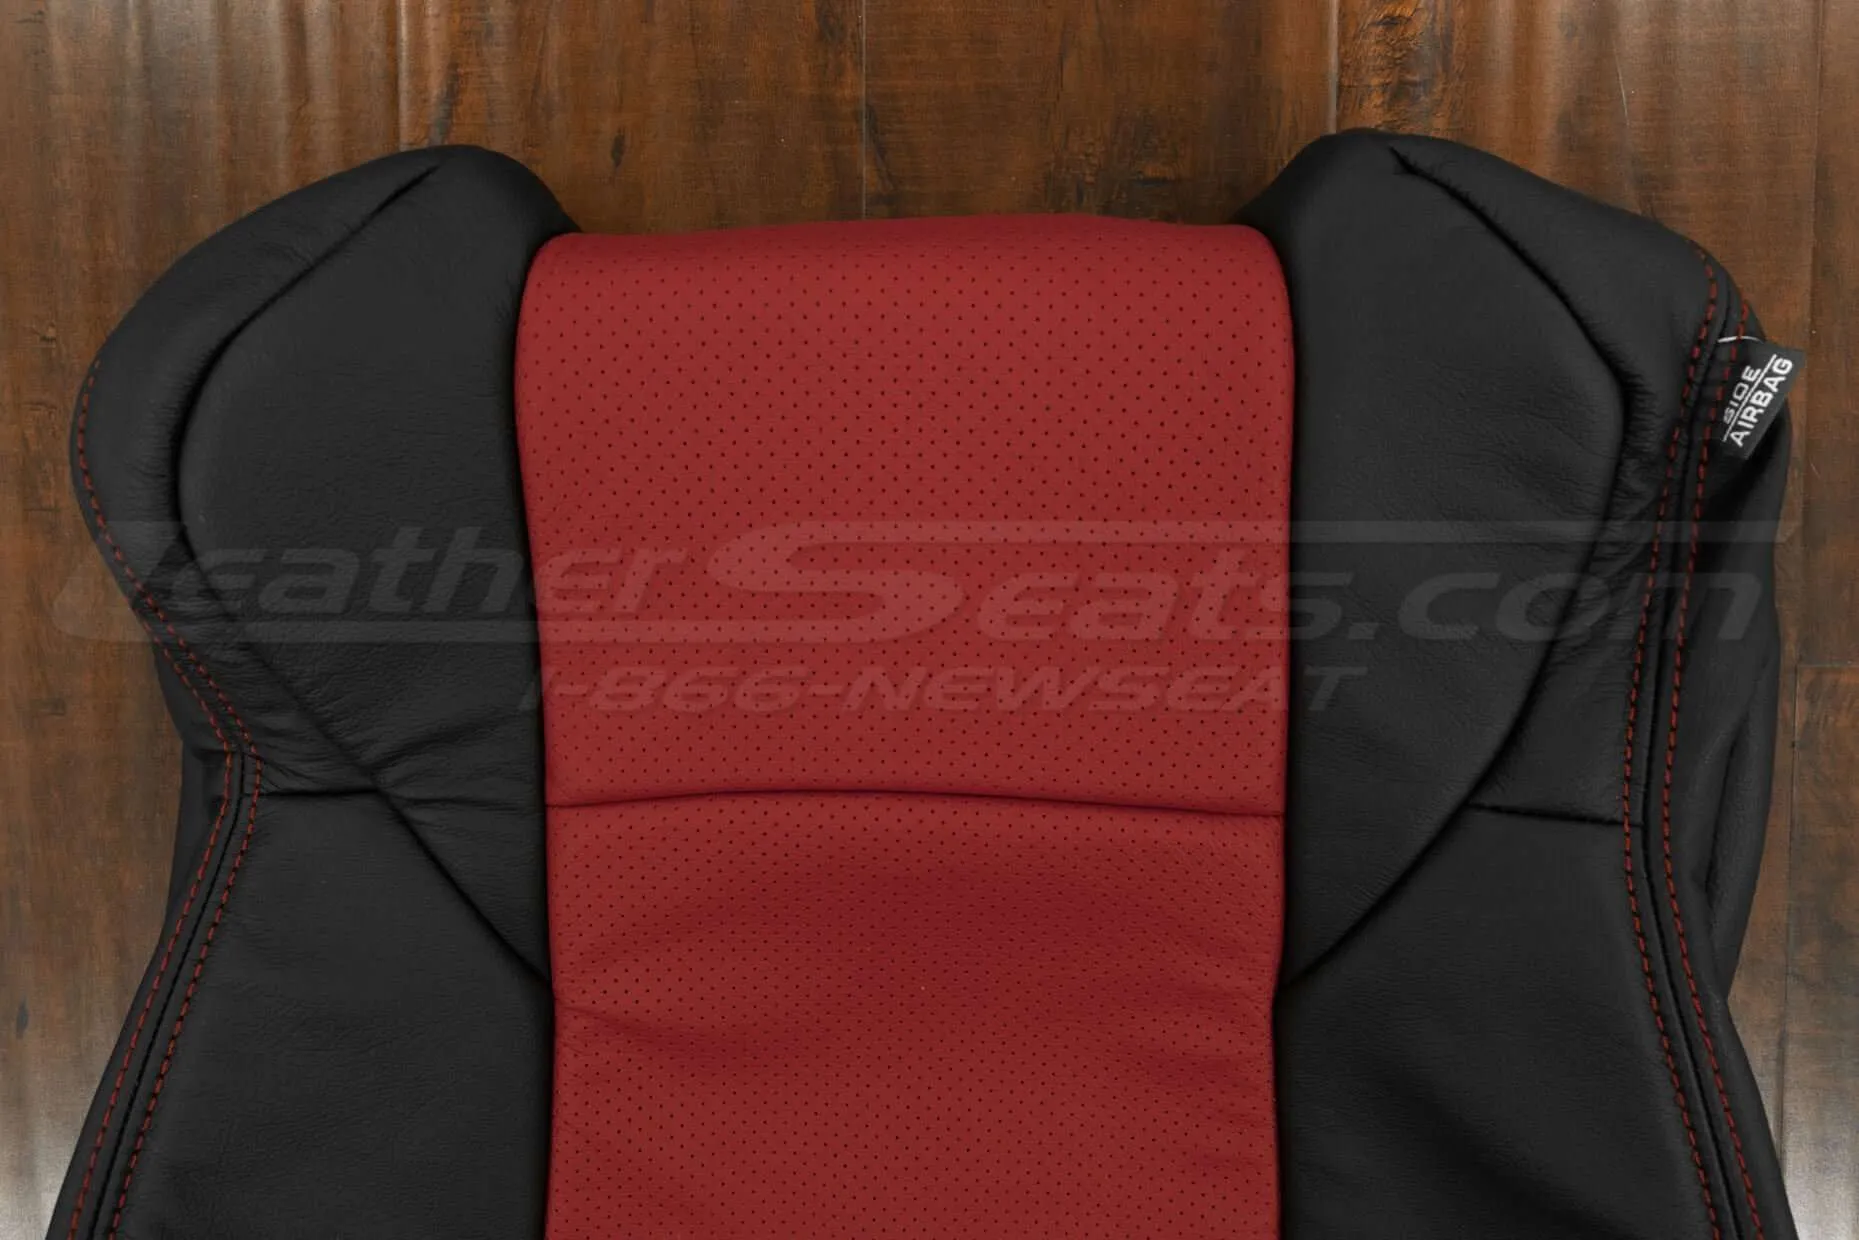 Upper section of perforated backrest